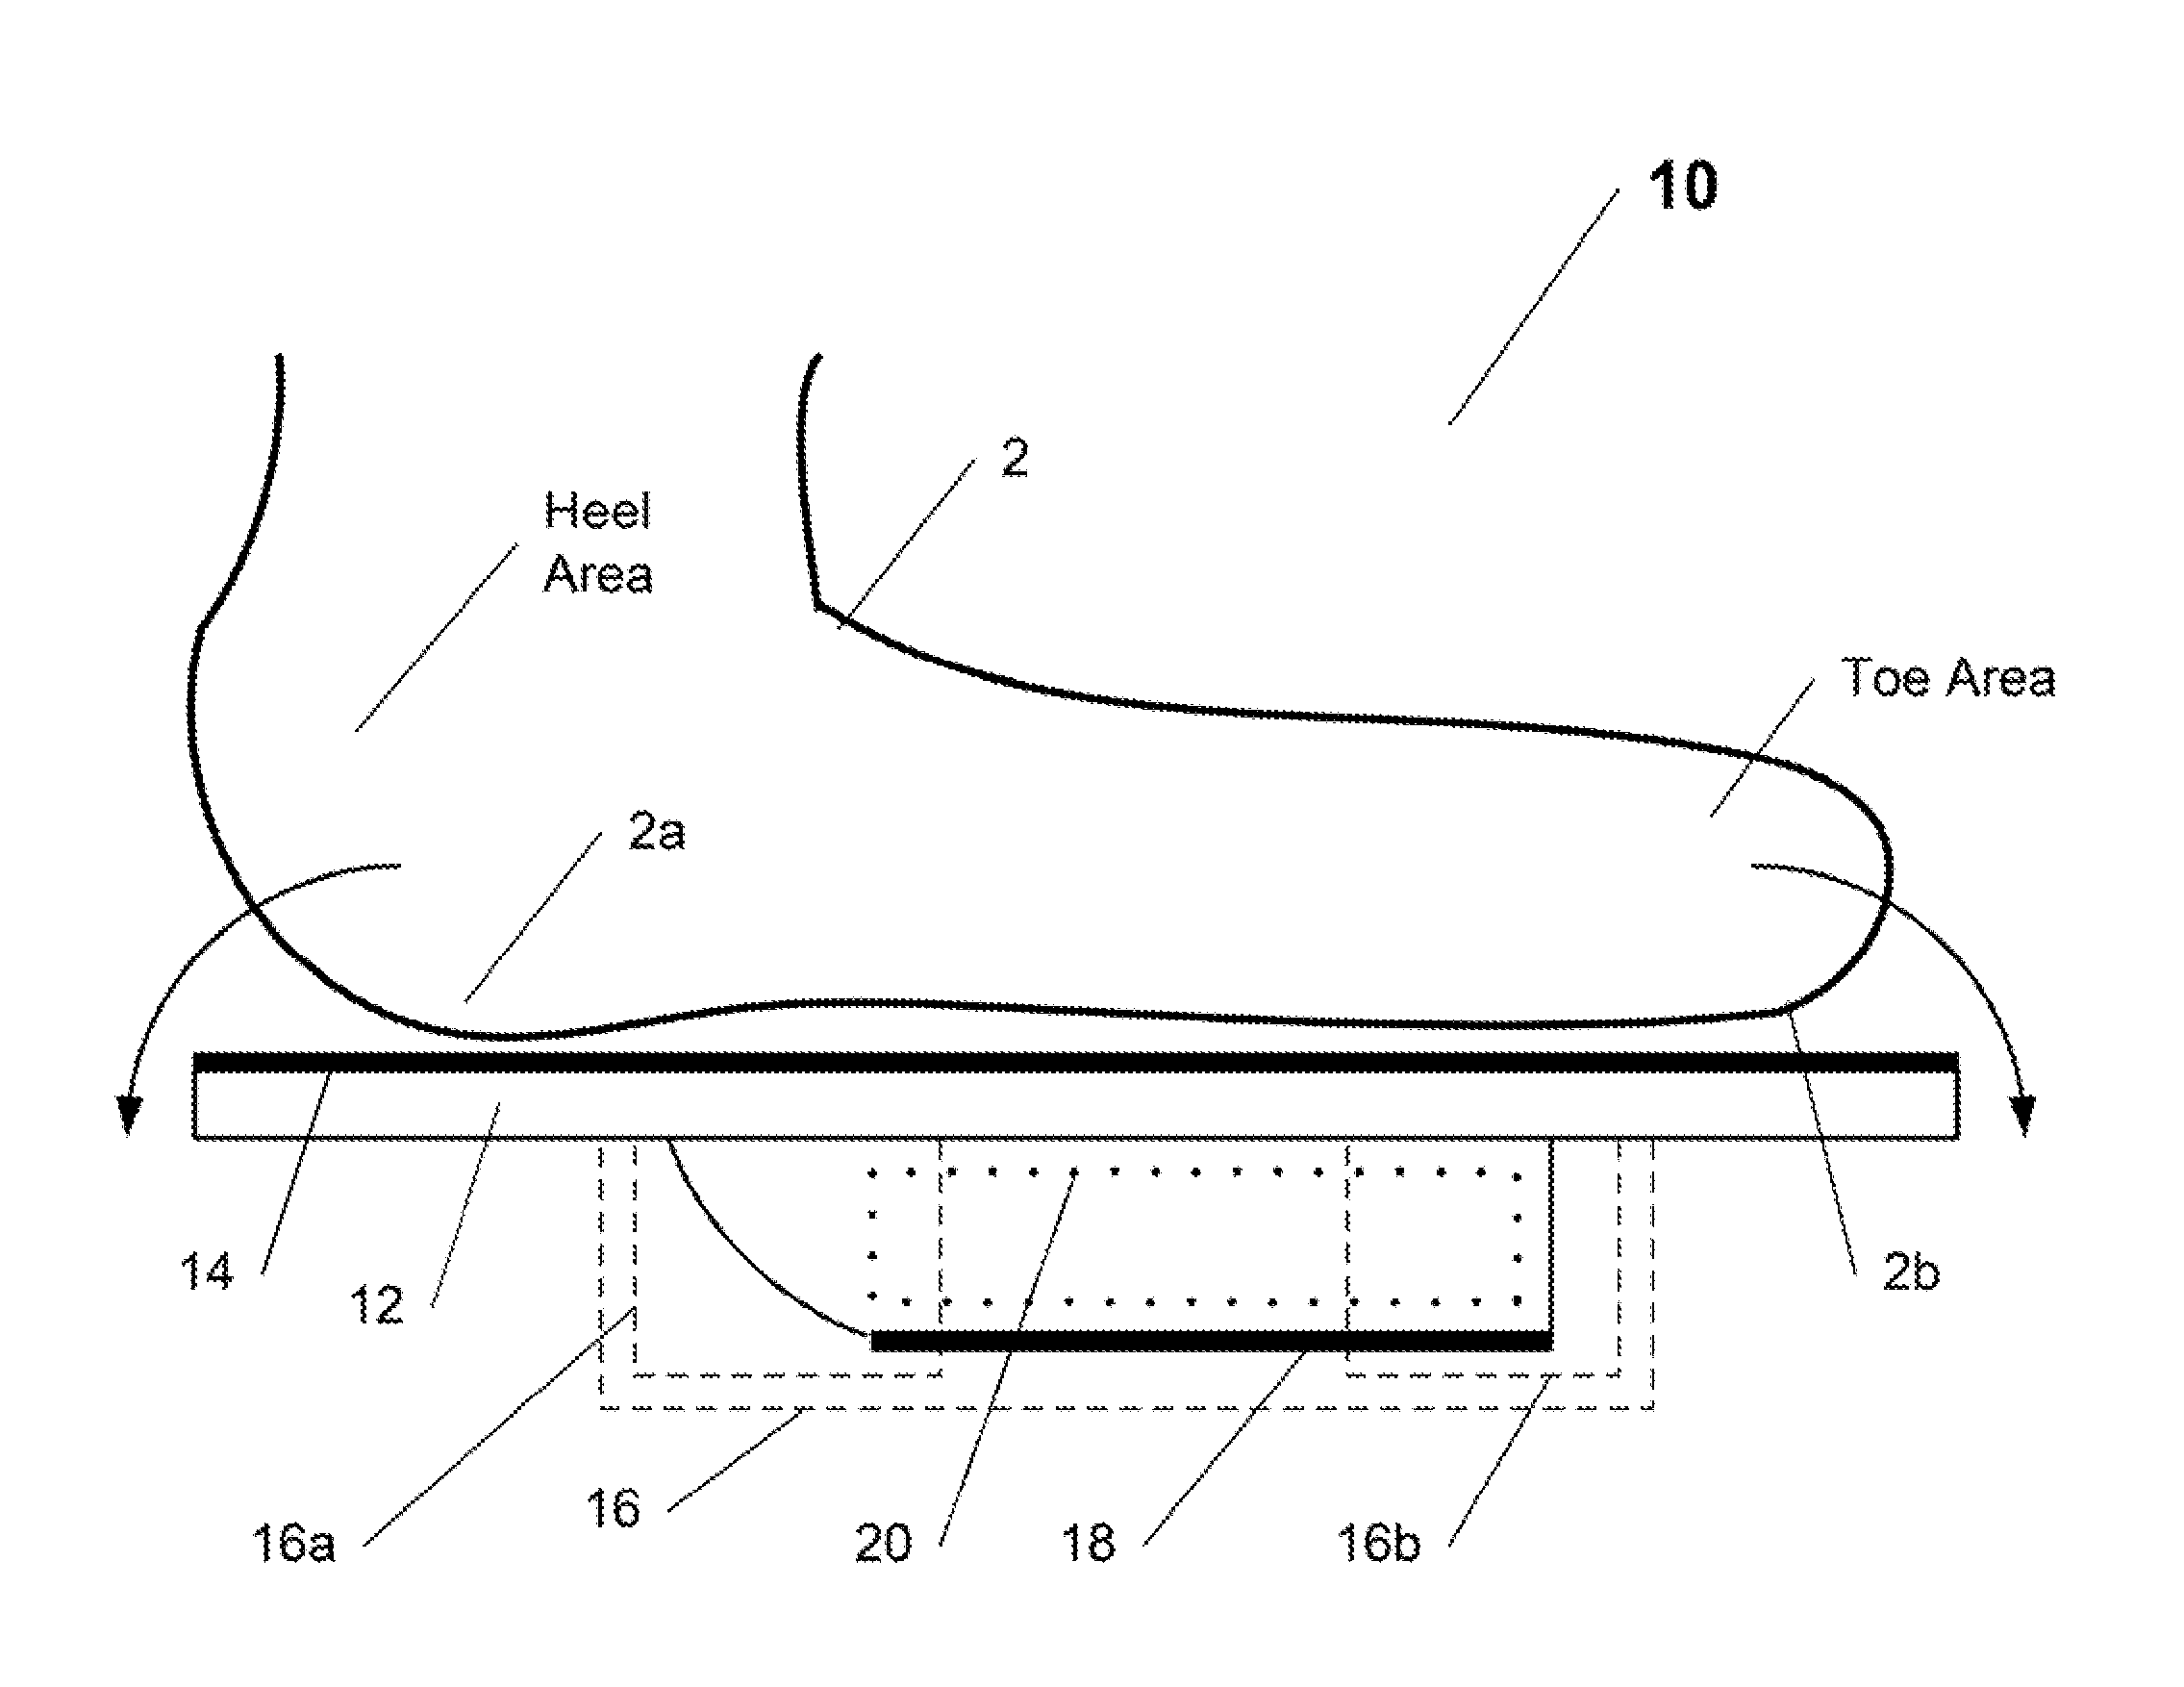 Configurable Foot-Operable Electronic Control Interface Apparatus and Method